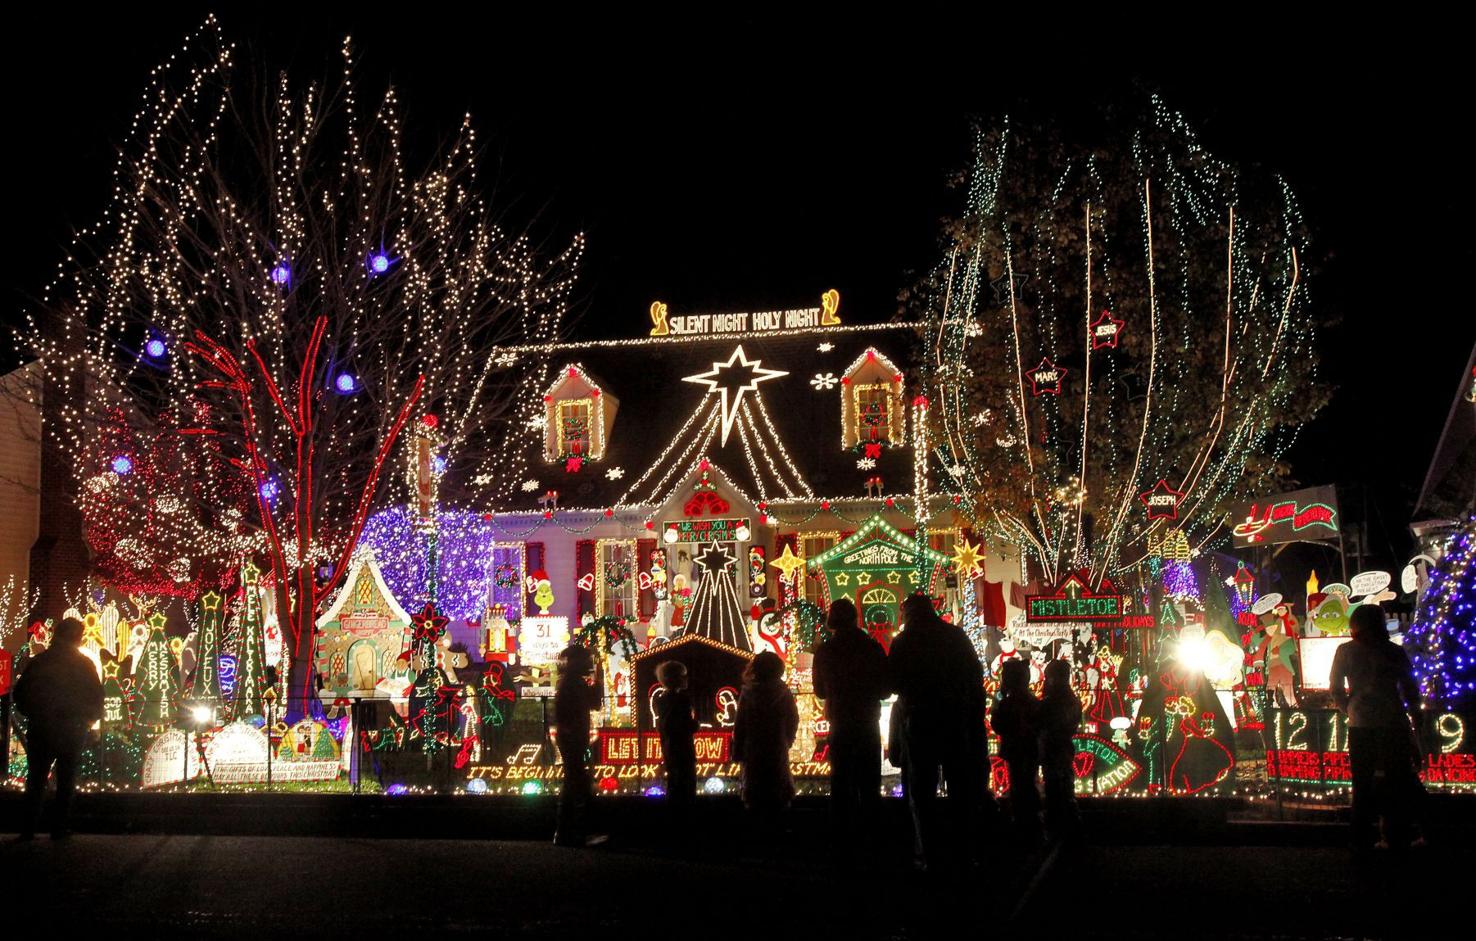 Suggested route to hit 10 of Richmond's most popular Tacky Light homes